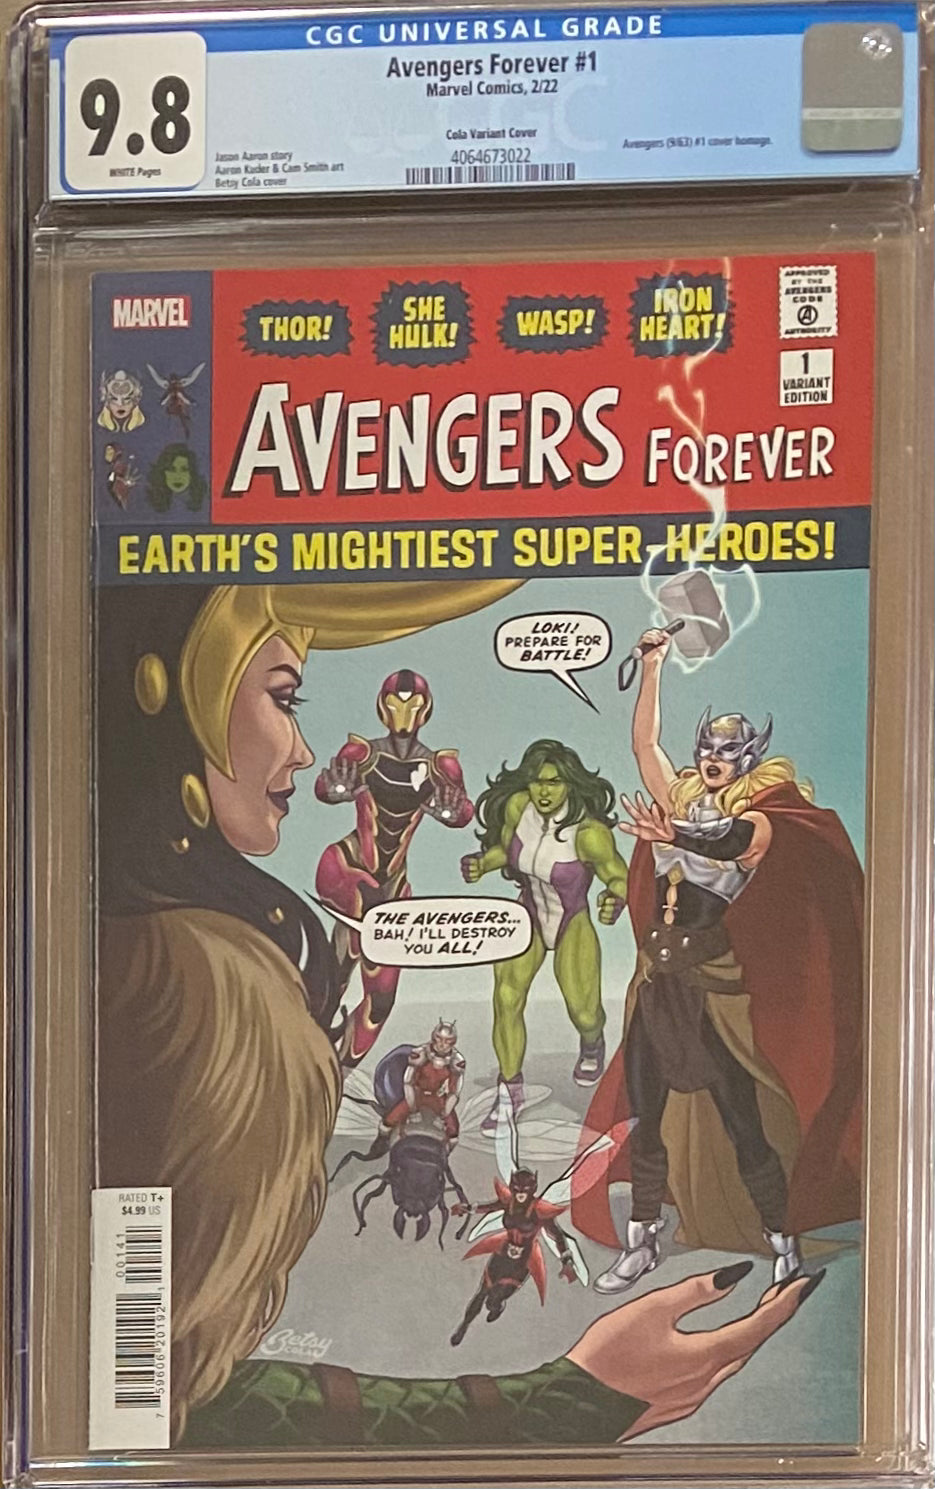 Avengers Forever #1 Cola 1:25 "Homage" Retailer Incentive Variant CGC 9.8